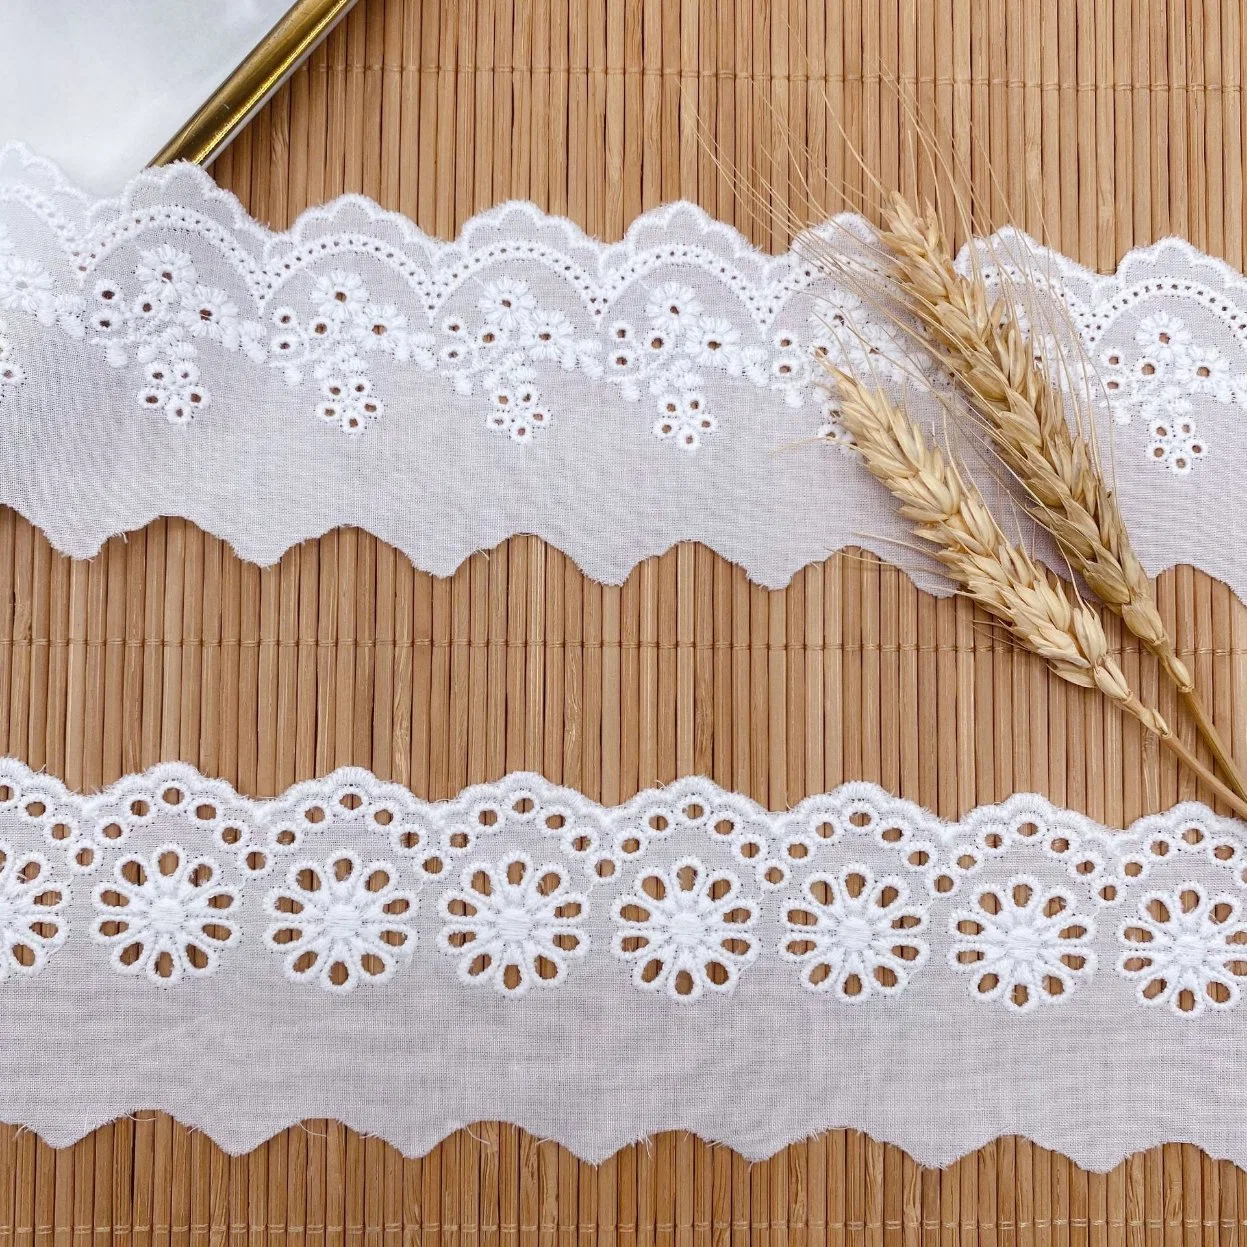 Children's Clothing Accessories Lolita DIY Cotton Lace Punch Small Flower Hollow Embroidery